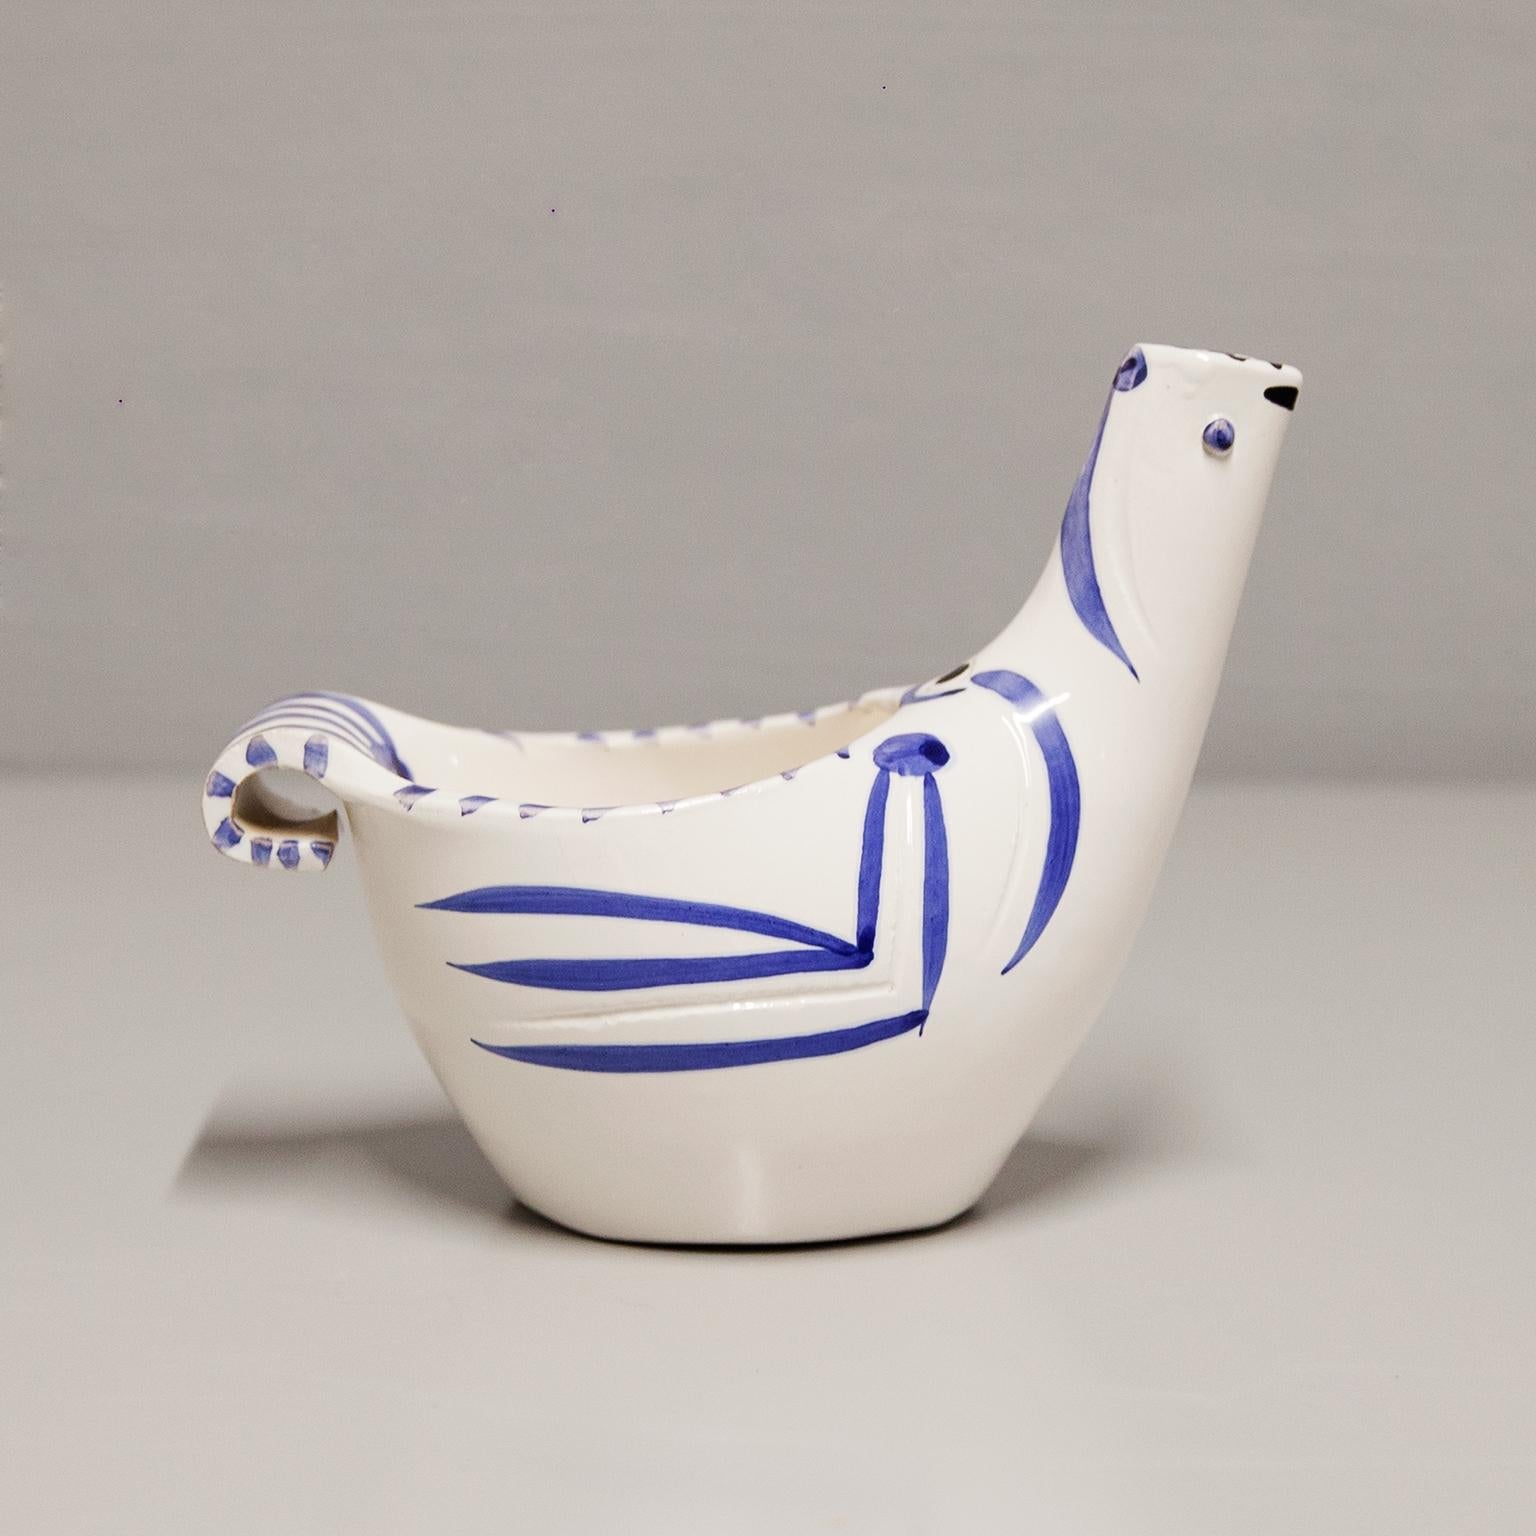 Pablo Picasso designed Stone Vase Faience in white clay with blue and black painting, glazed. Ex. 129/500. Madoura, Edition Picasso. Madoura Plein Feu. 16 H x22 W x 10.5 D cm. Ramie 435.